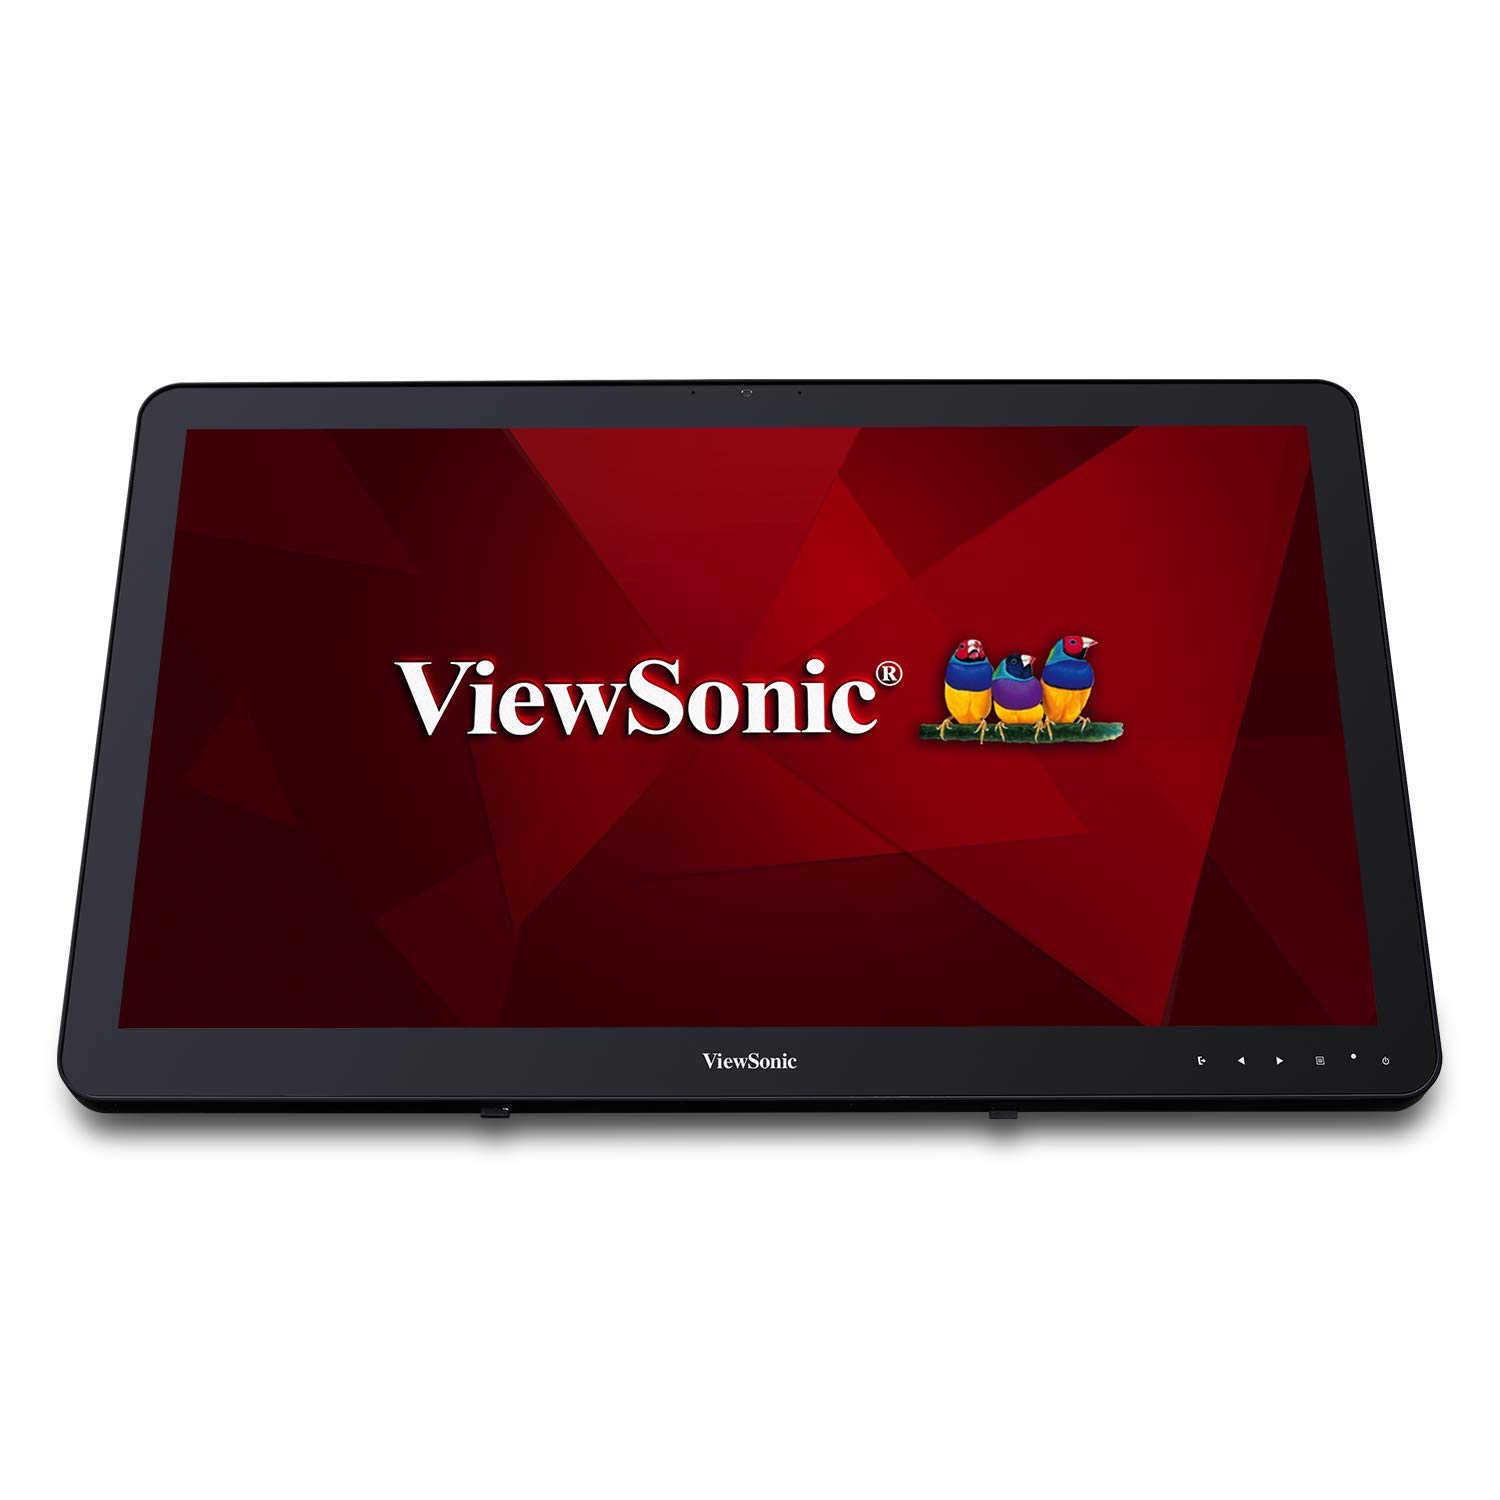 Viewsonic VSD243-BKA-US0 24 Inch 1080p 10-Point Touch Smart Digital Display with Bluetooth Dual Band Wi-Fi and Android Oreo 8.1 OS